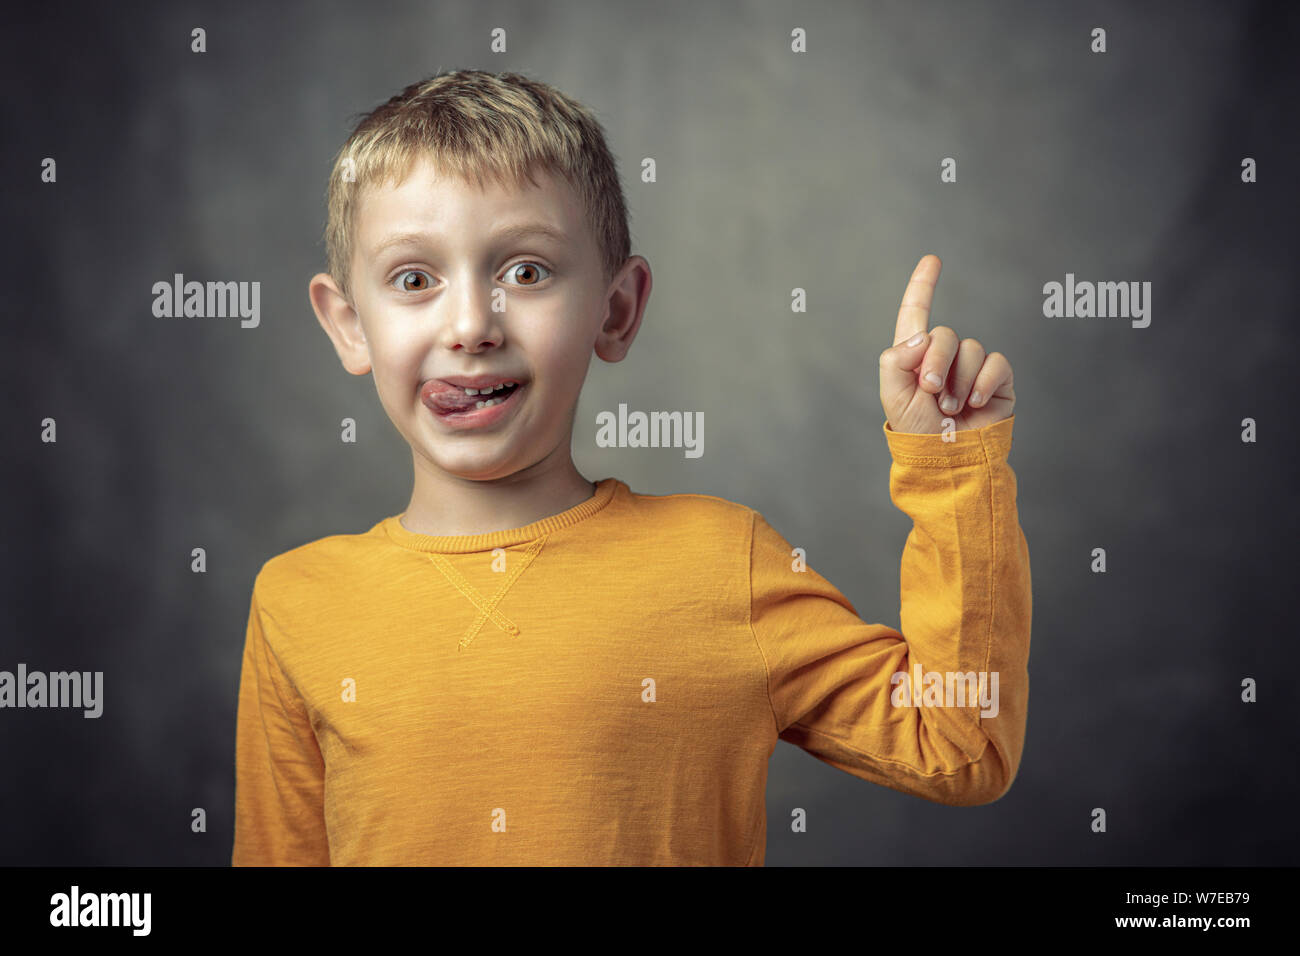 Funny portrait of a 6 year old Caucasian child with his tongue sticking out. shot taken in the studio. Stock Photo